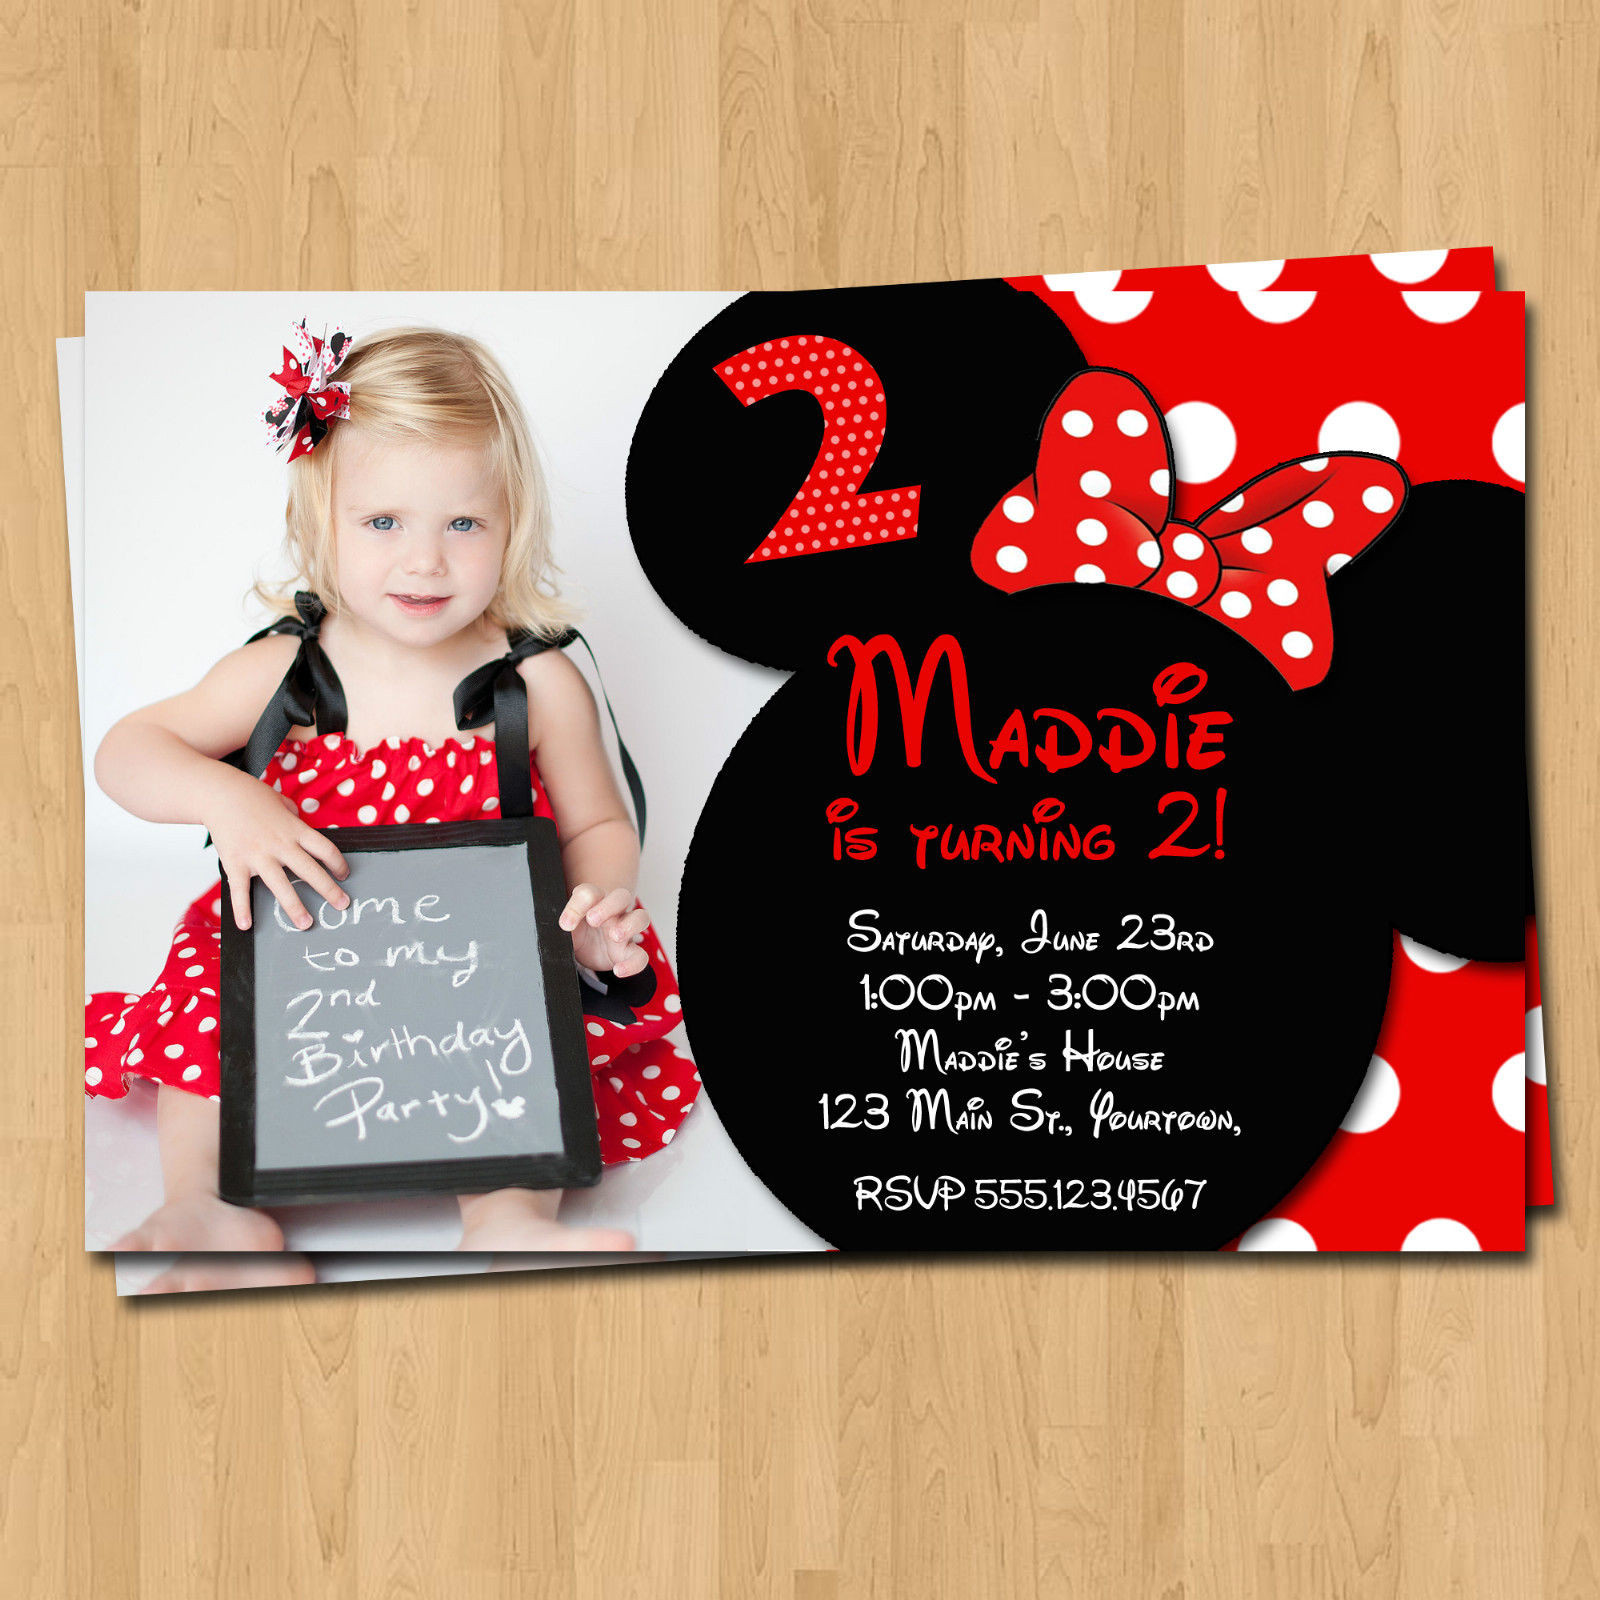 Minnie Mouse Birthday Invitations Personalized
 Free Printable Minnie Mouse Birthday Party Invitations